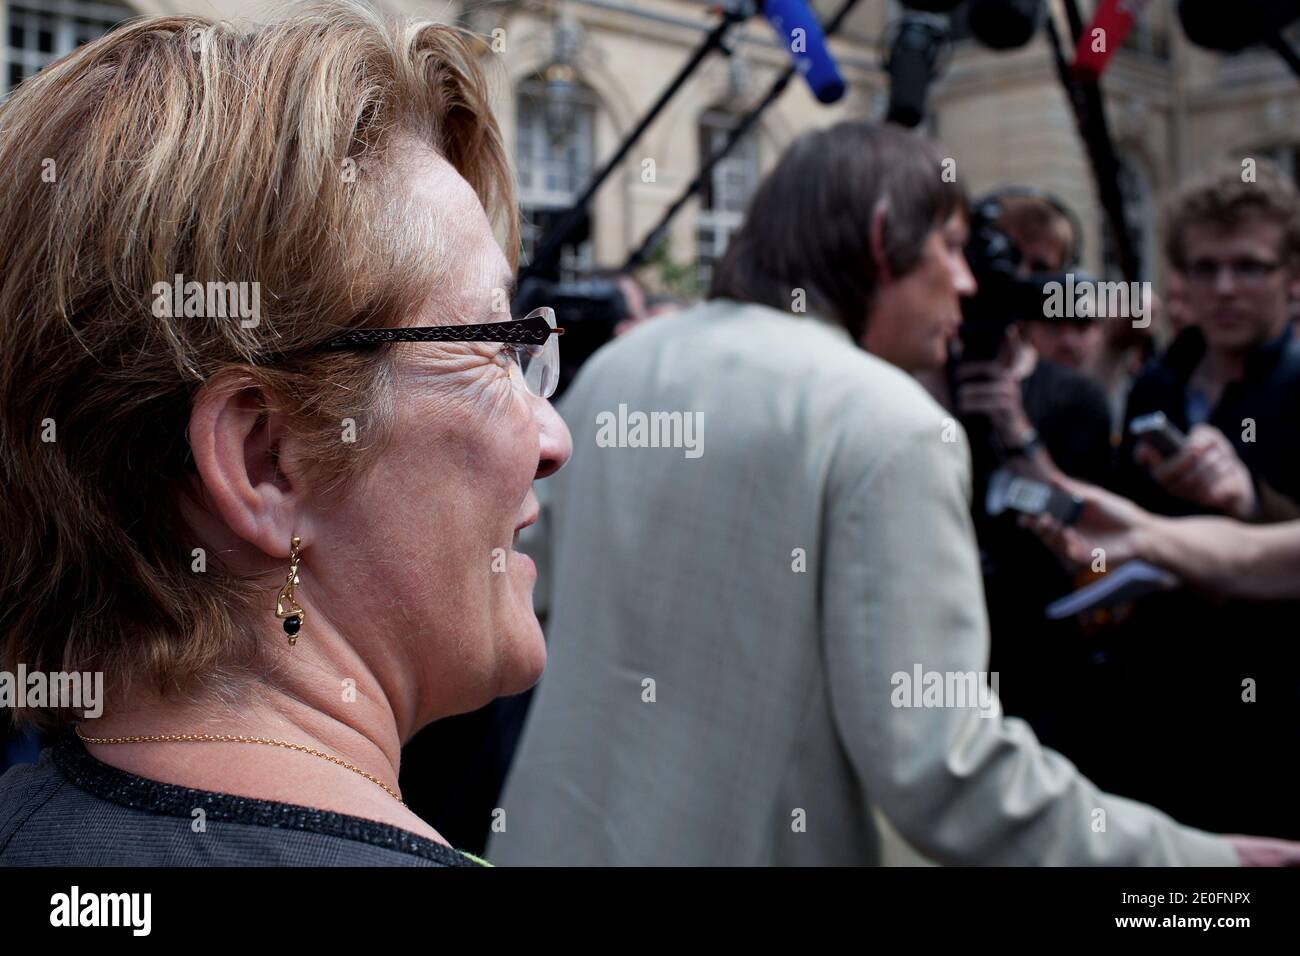 CGT labour union leader Bernard Thibault answers to medias next to Nadine Prigent after a meeting with French Prime Minister, Jean-Marc Ayrault, at the Hotel Matignon, in Paris, France on May 29, 2012. Photo by Stephane Lemouton/ABACAPRESS.COM. Stock Photo